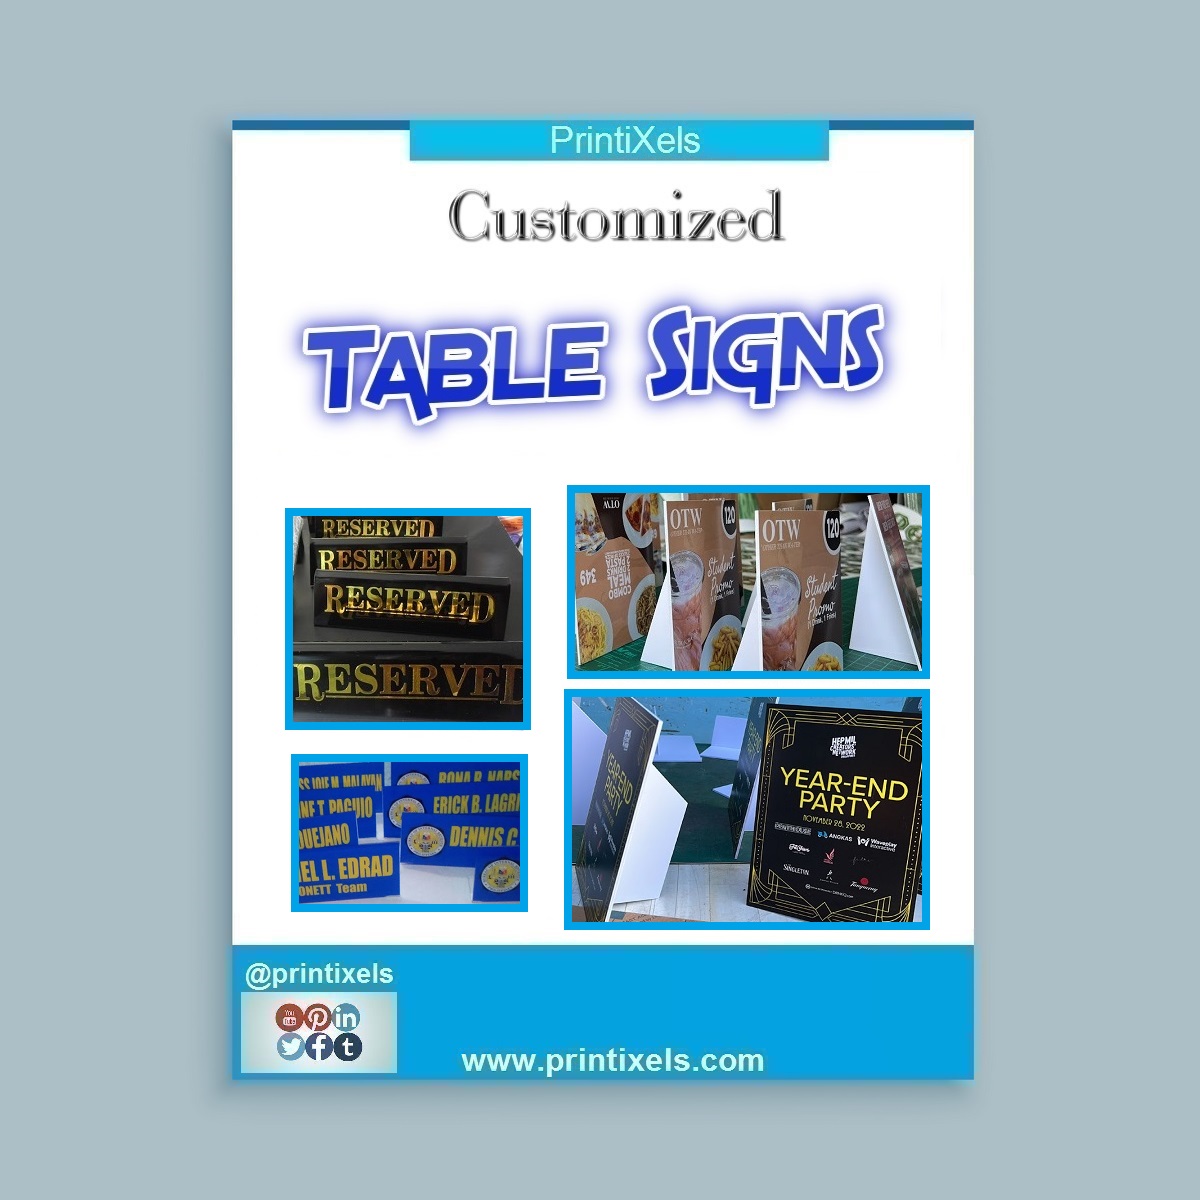 Customized Table Signs Philippines